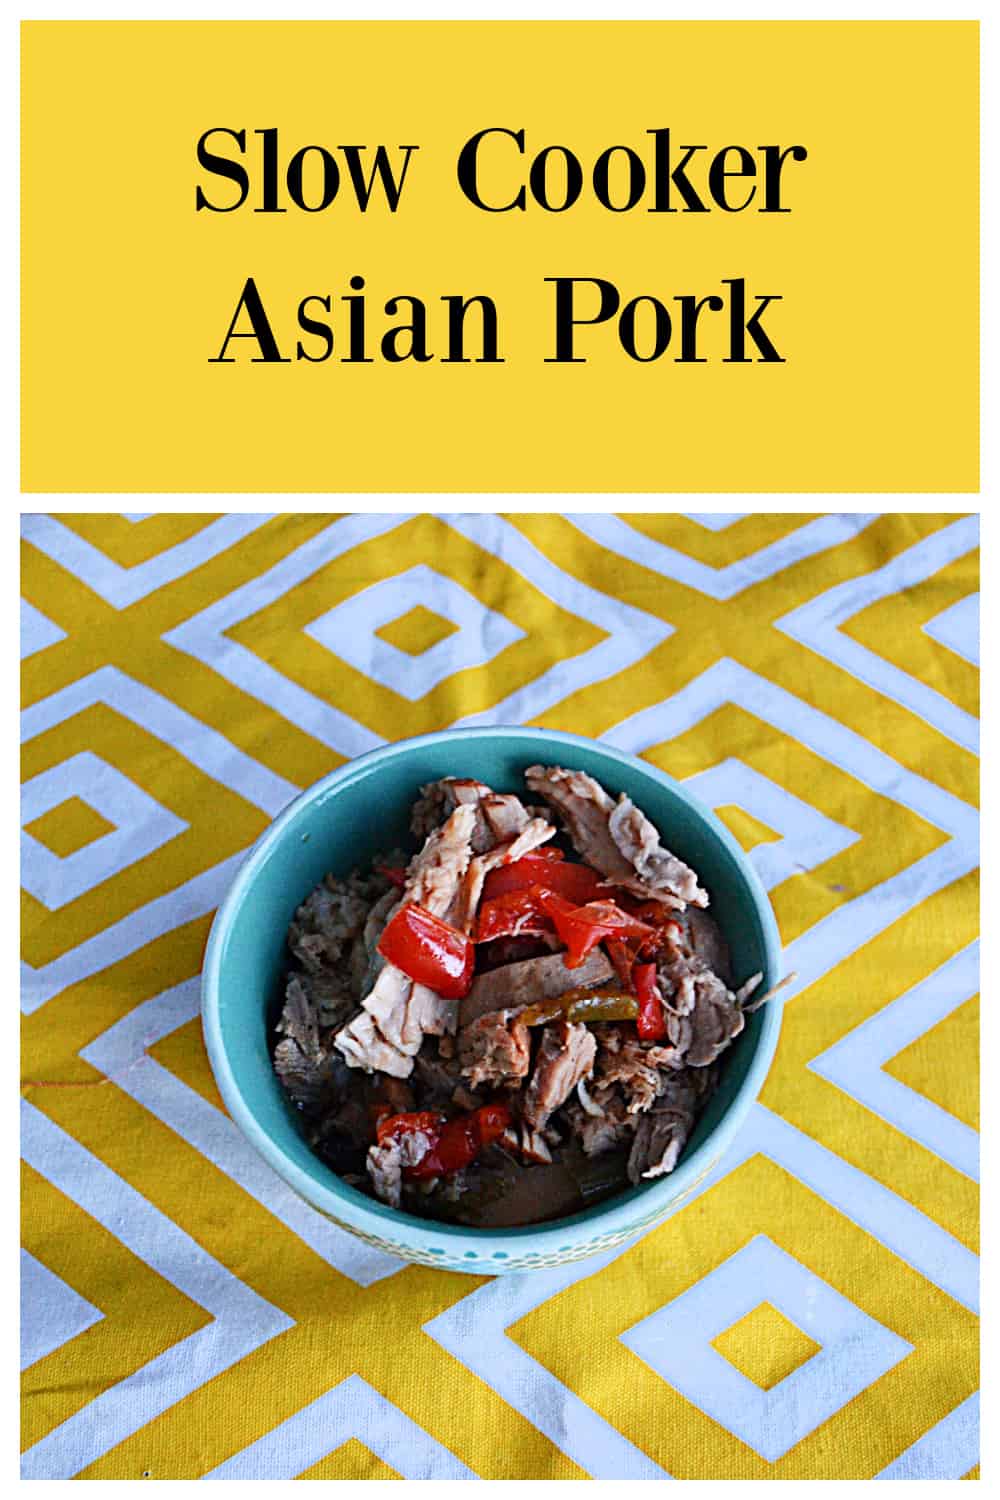 Pin Image:   Text title, a bowl of Pork and Peppers. 